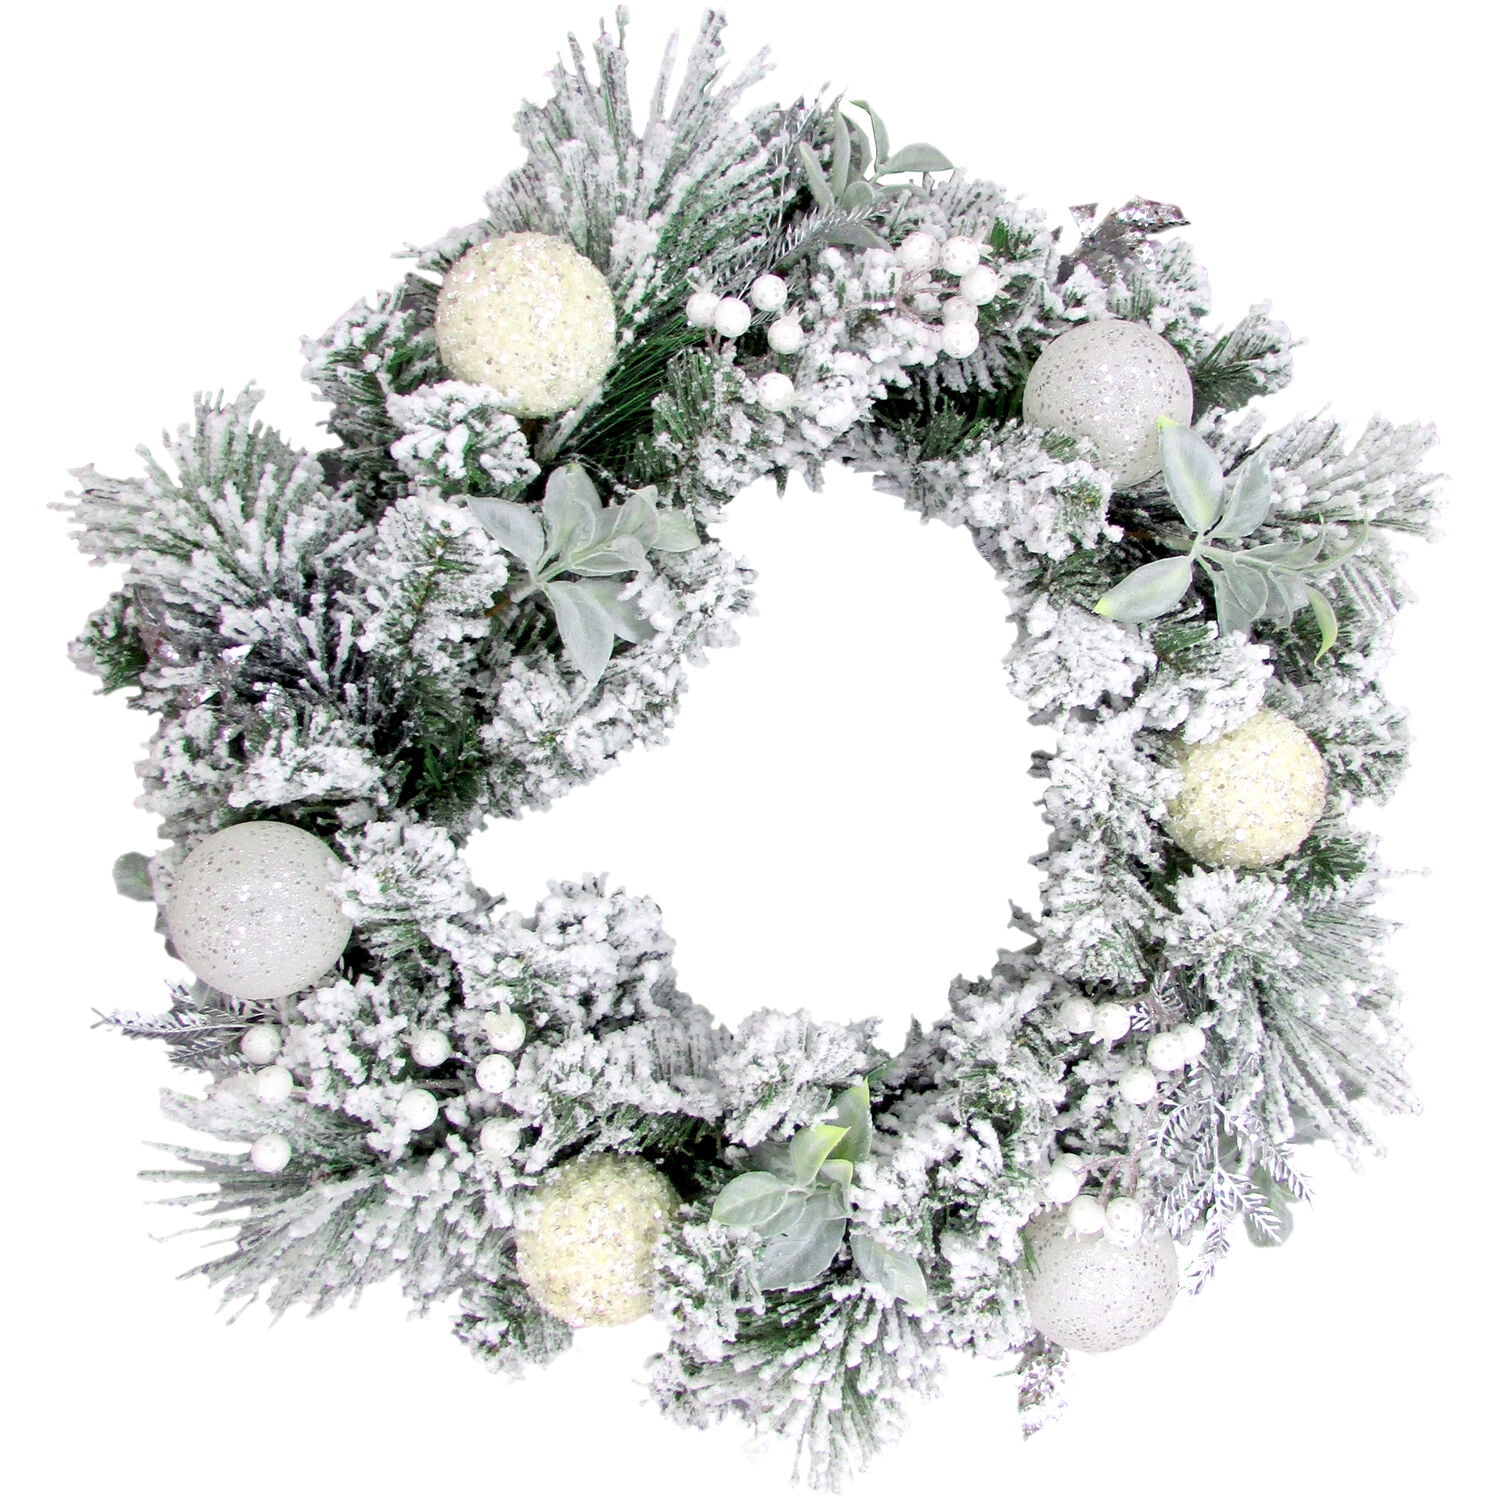 Farm Tractor Tire Wreath with Lights Ornament